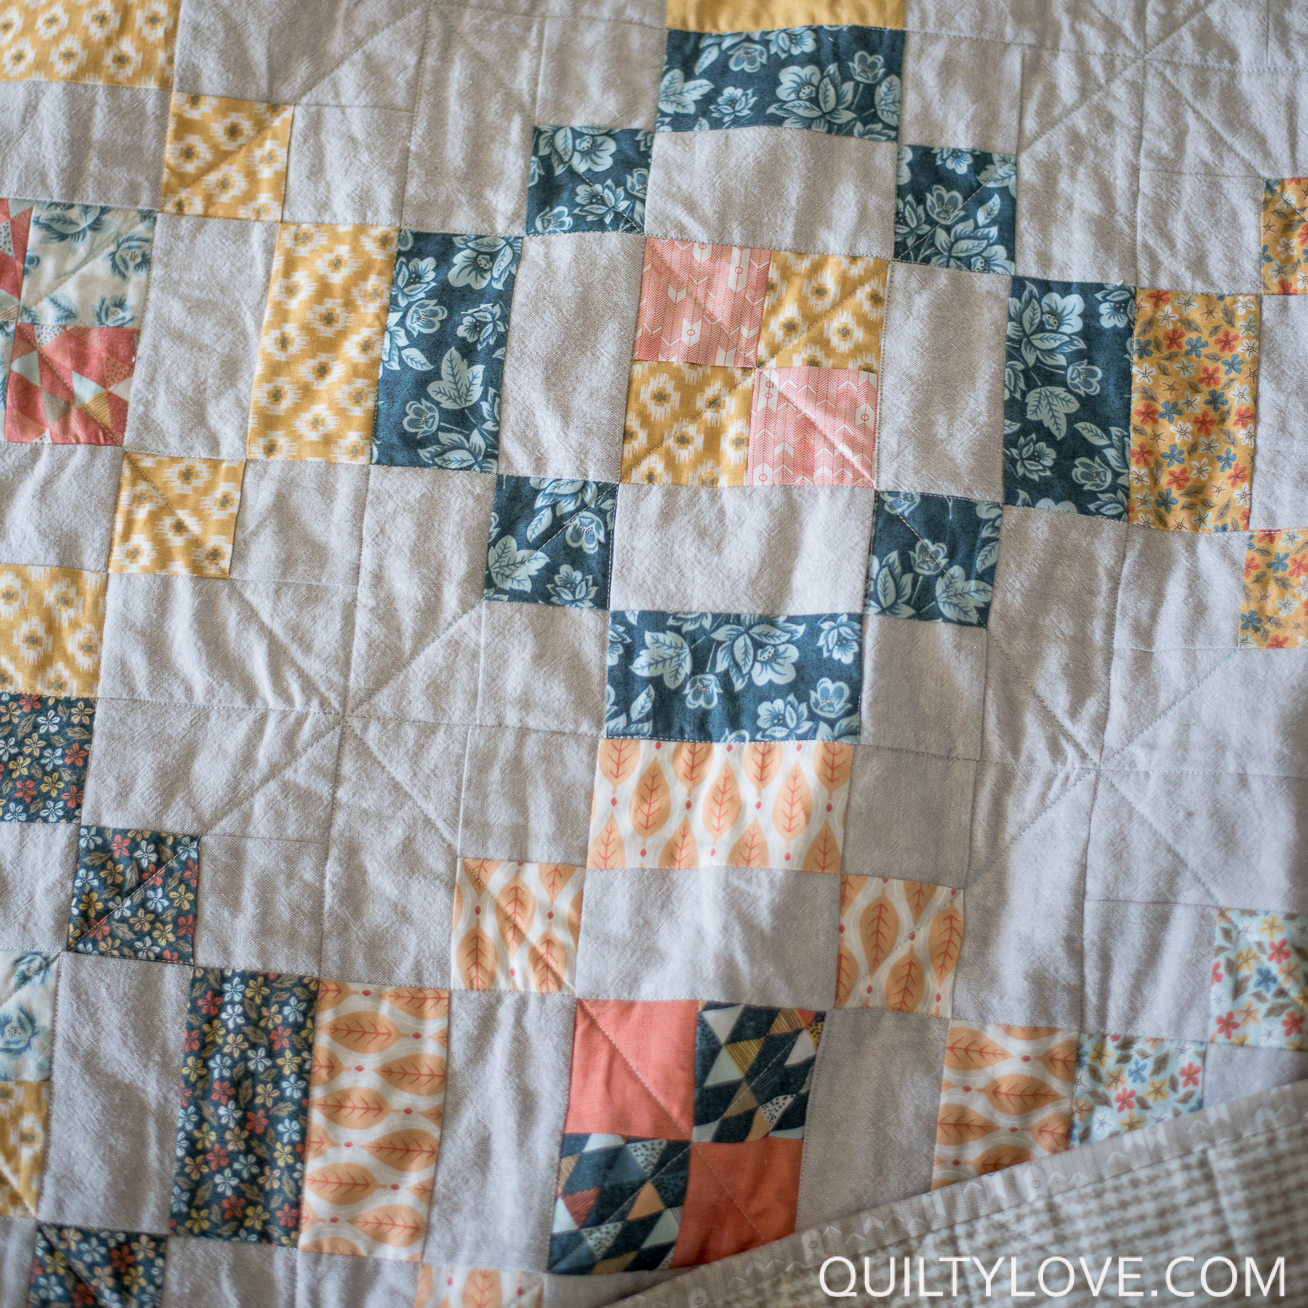 essex linen jelly rings quilt